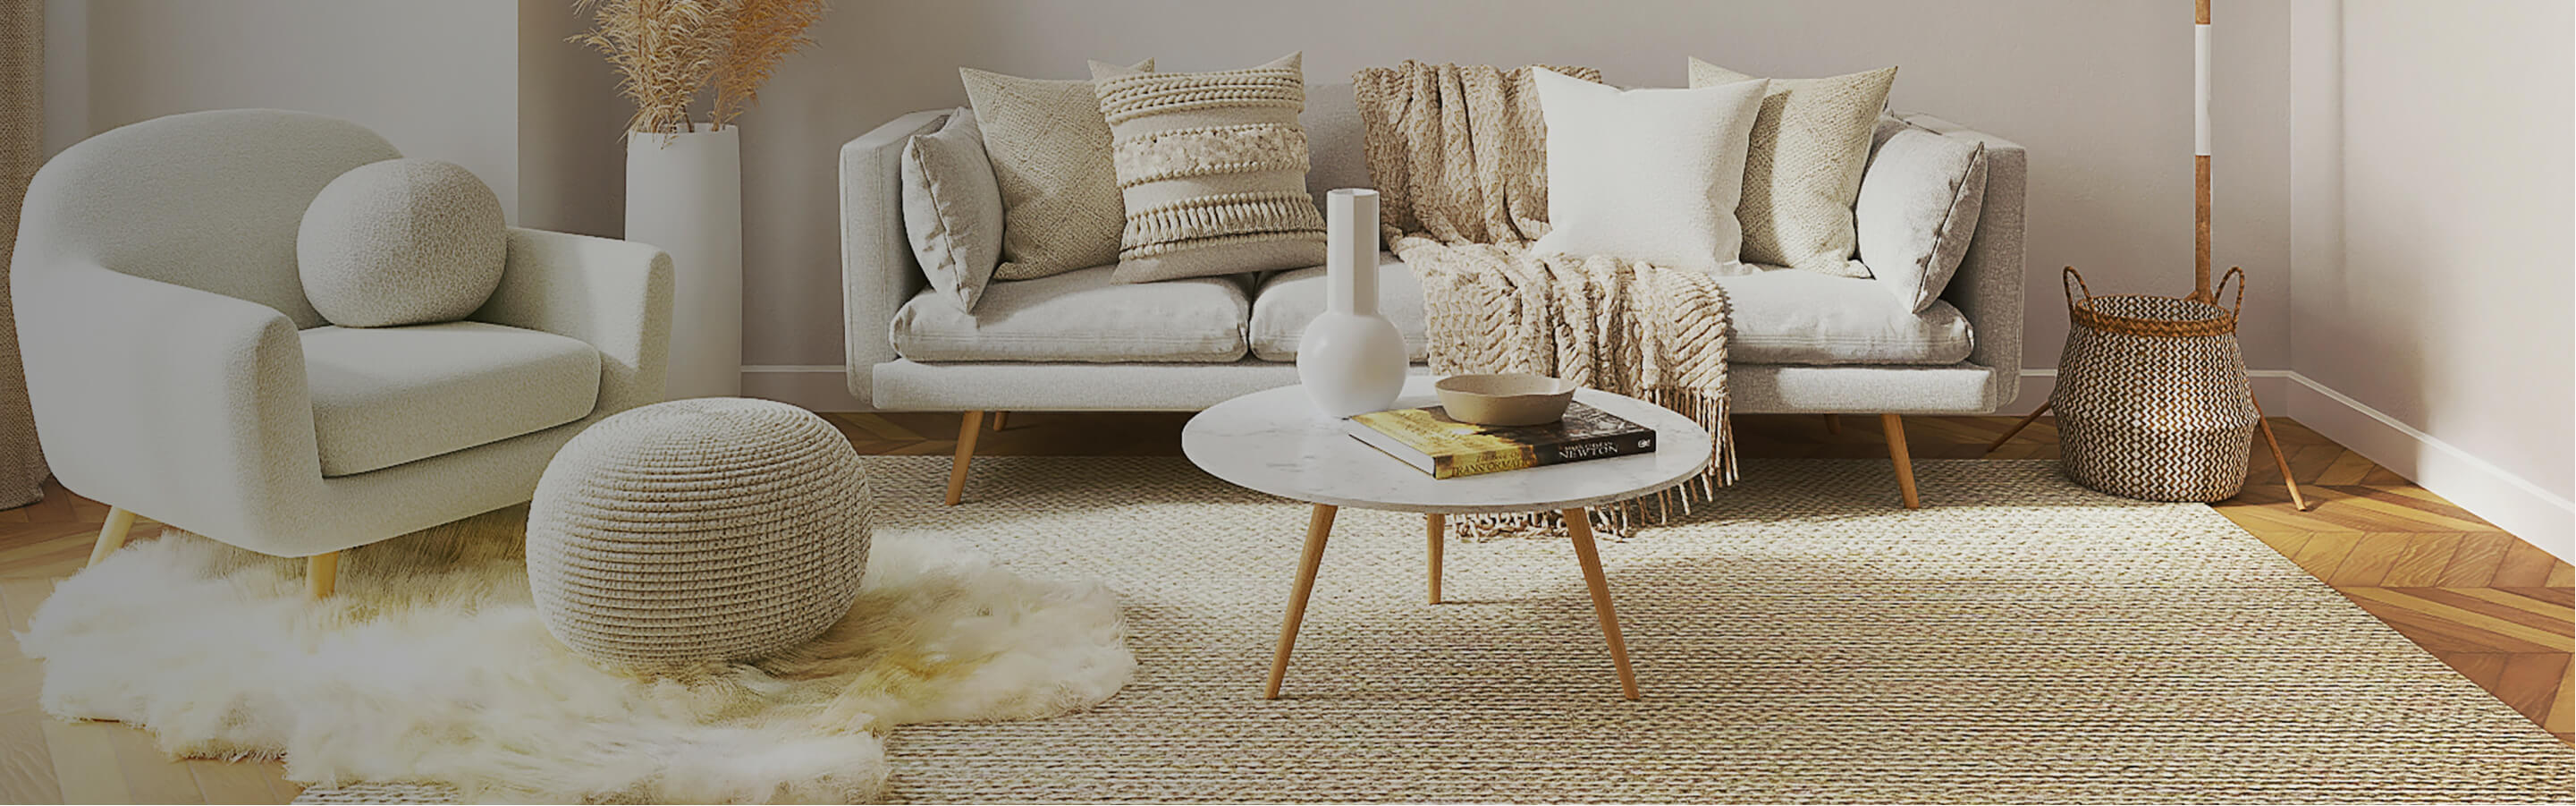 white and beige modern boho living space with natural rug and chevron wood floors